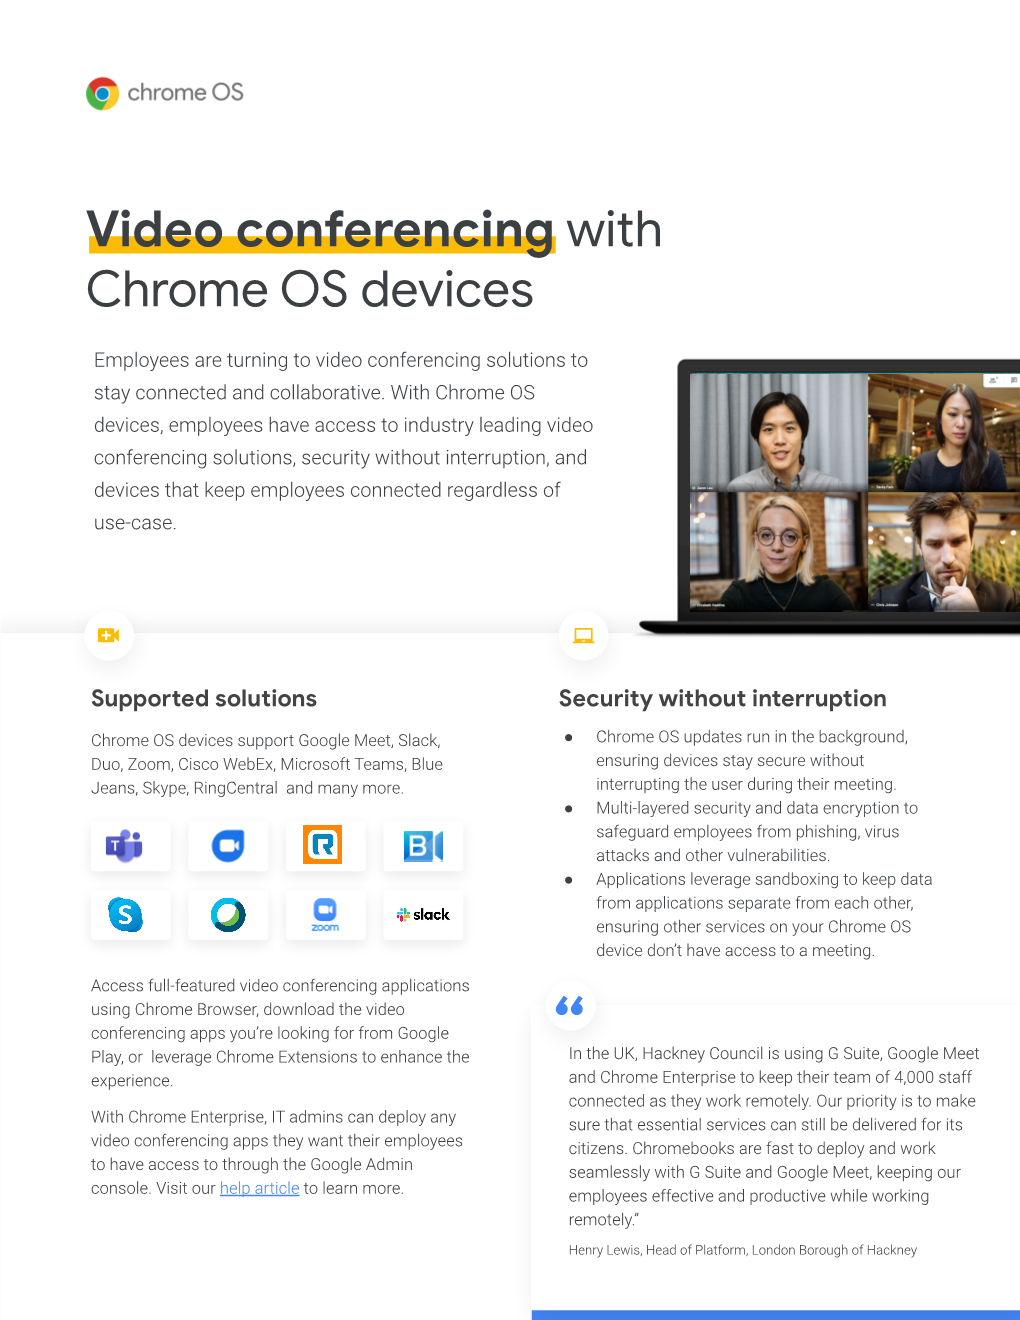 Video Conferencing with Chrome OS Devices